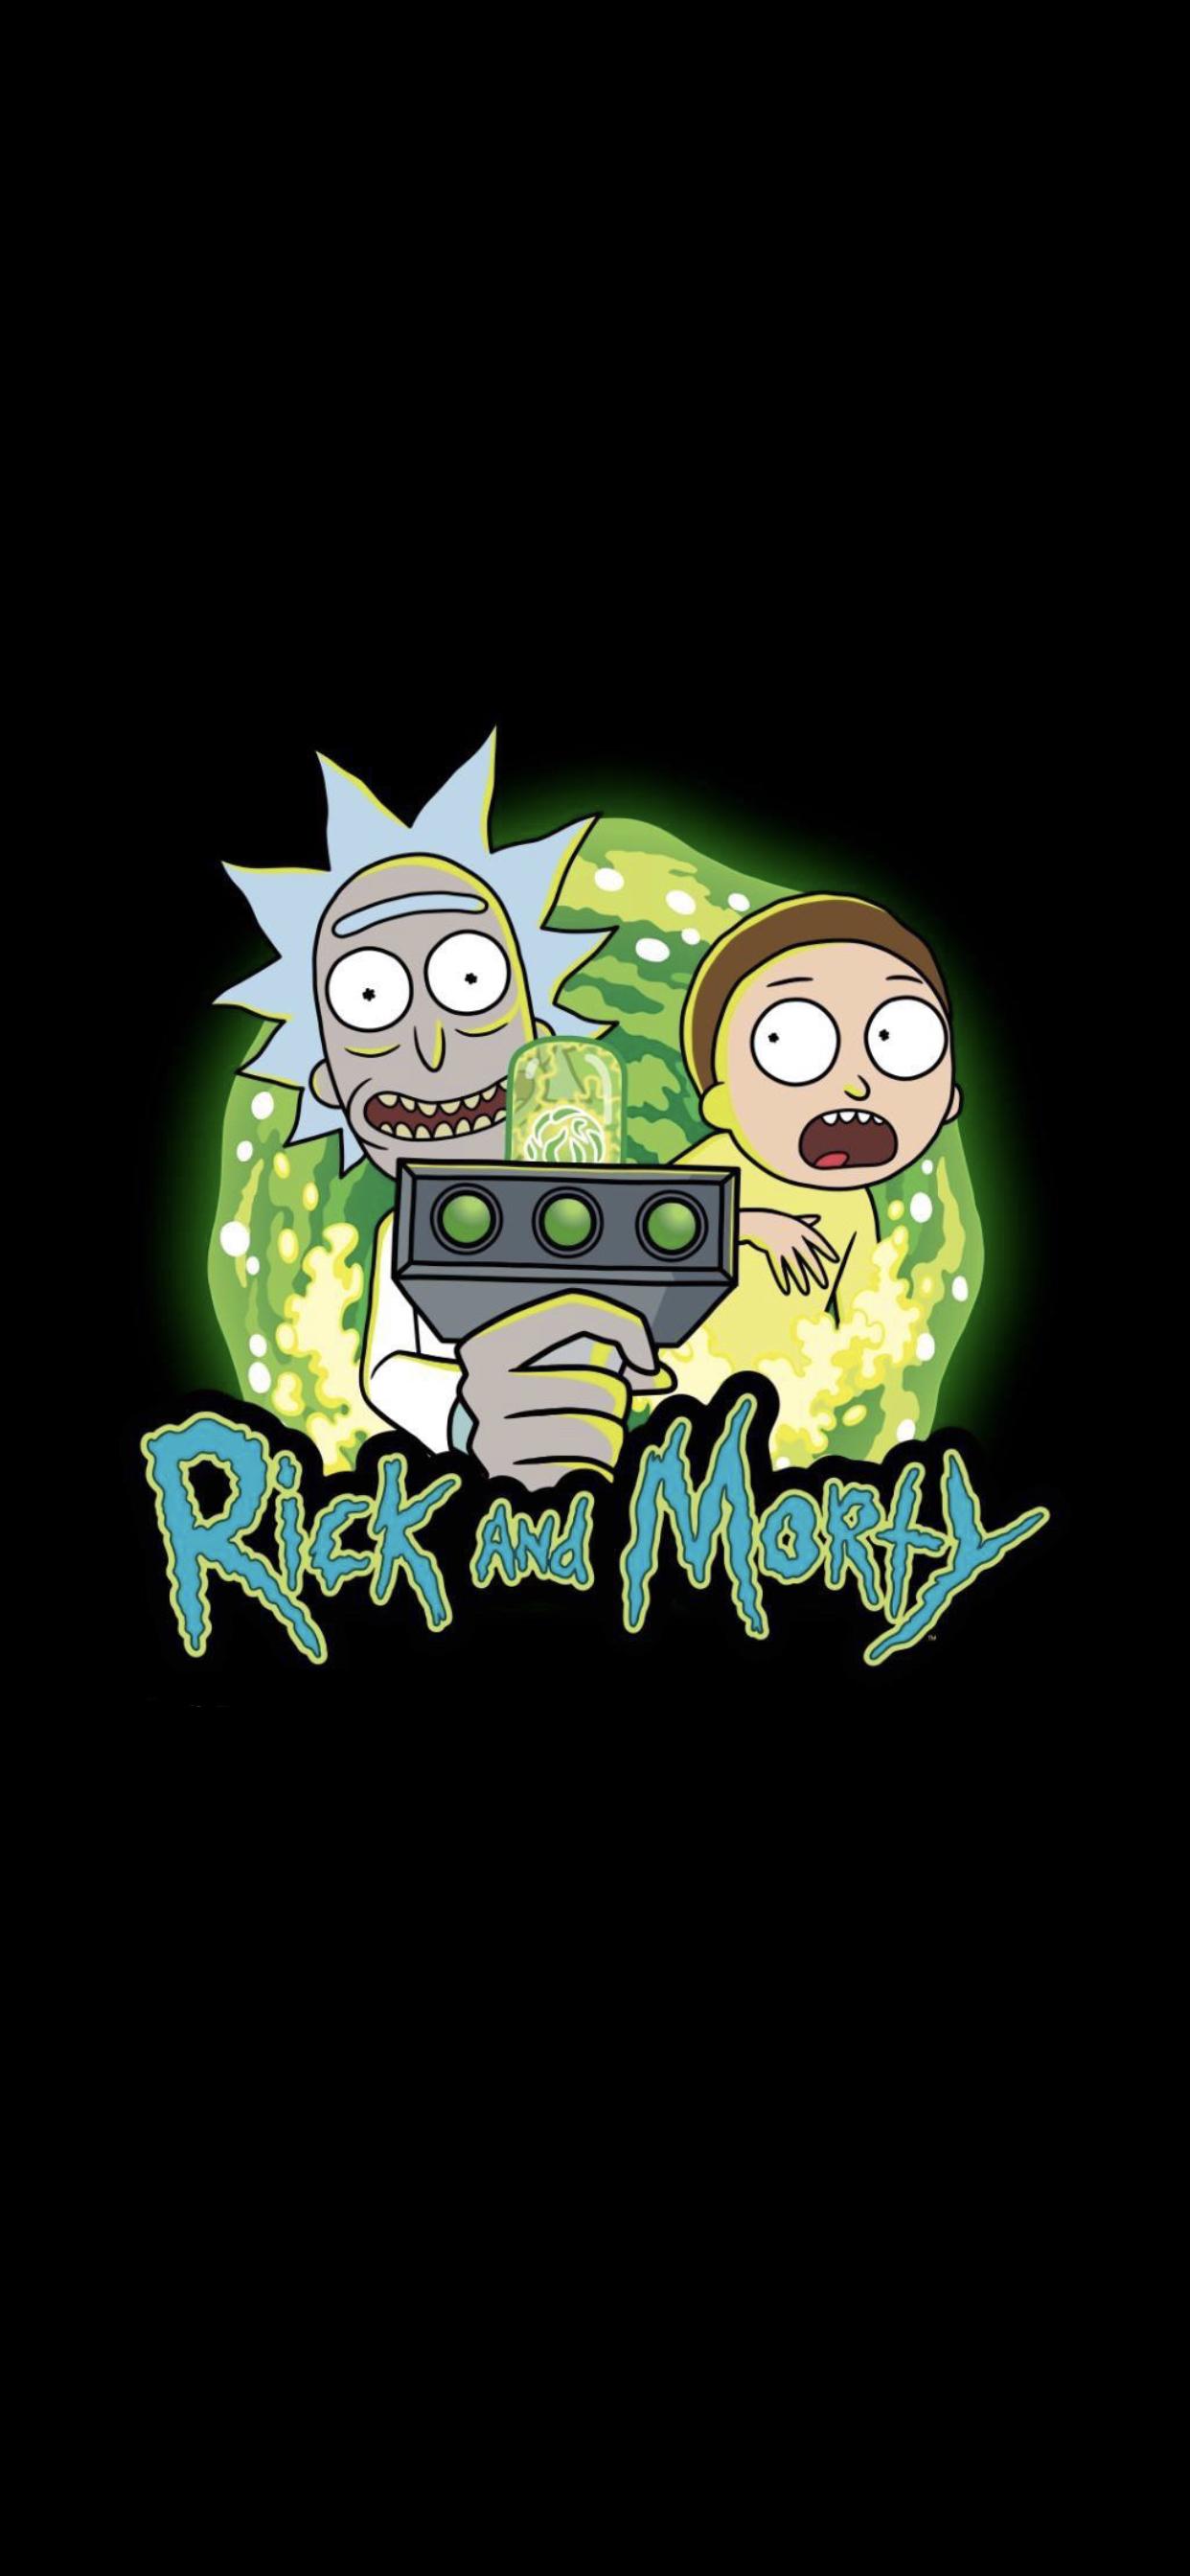 Rick And Morty Black Amoled Wallpapers - Wallpaper Cave